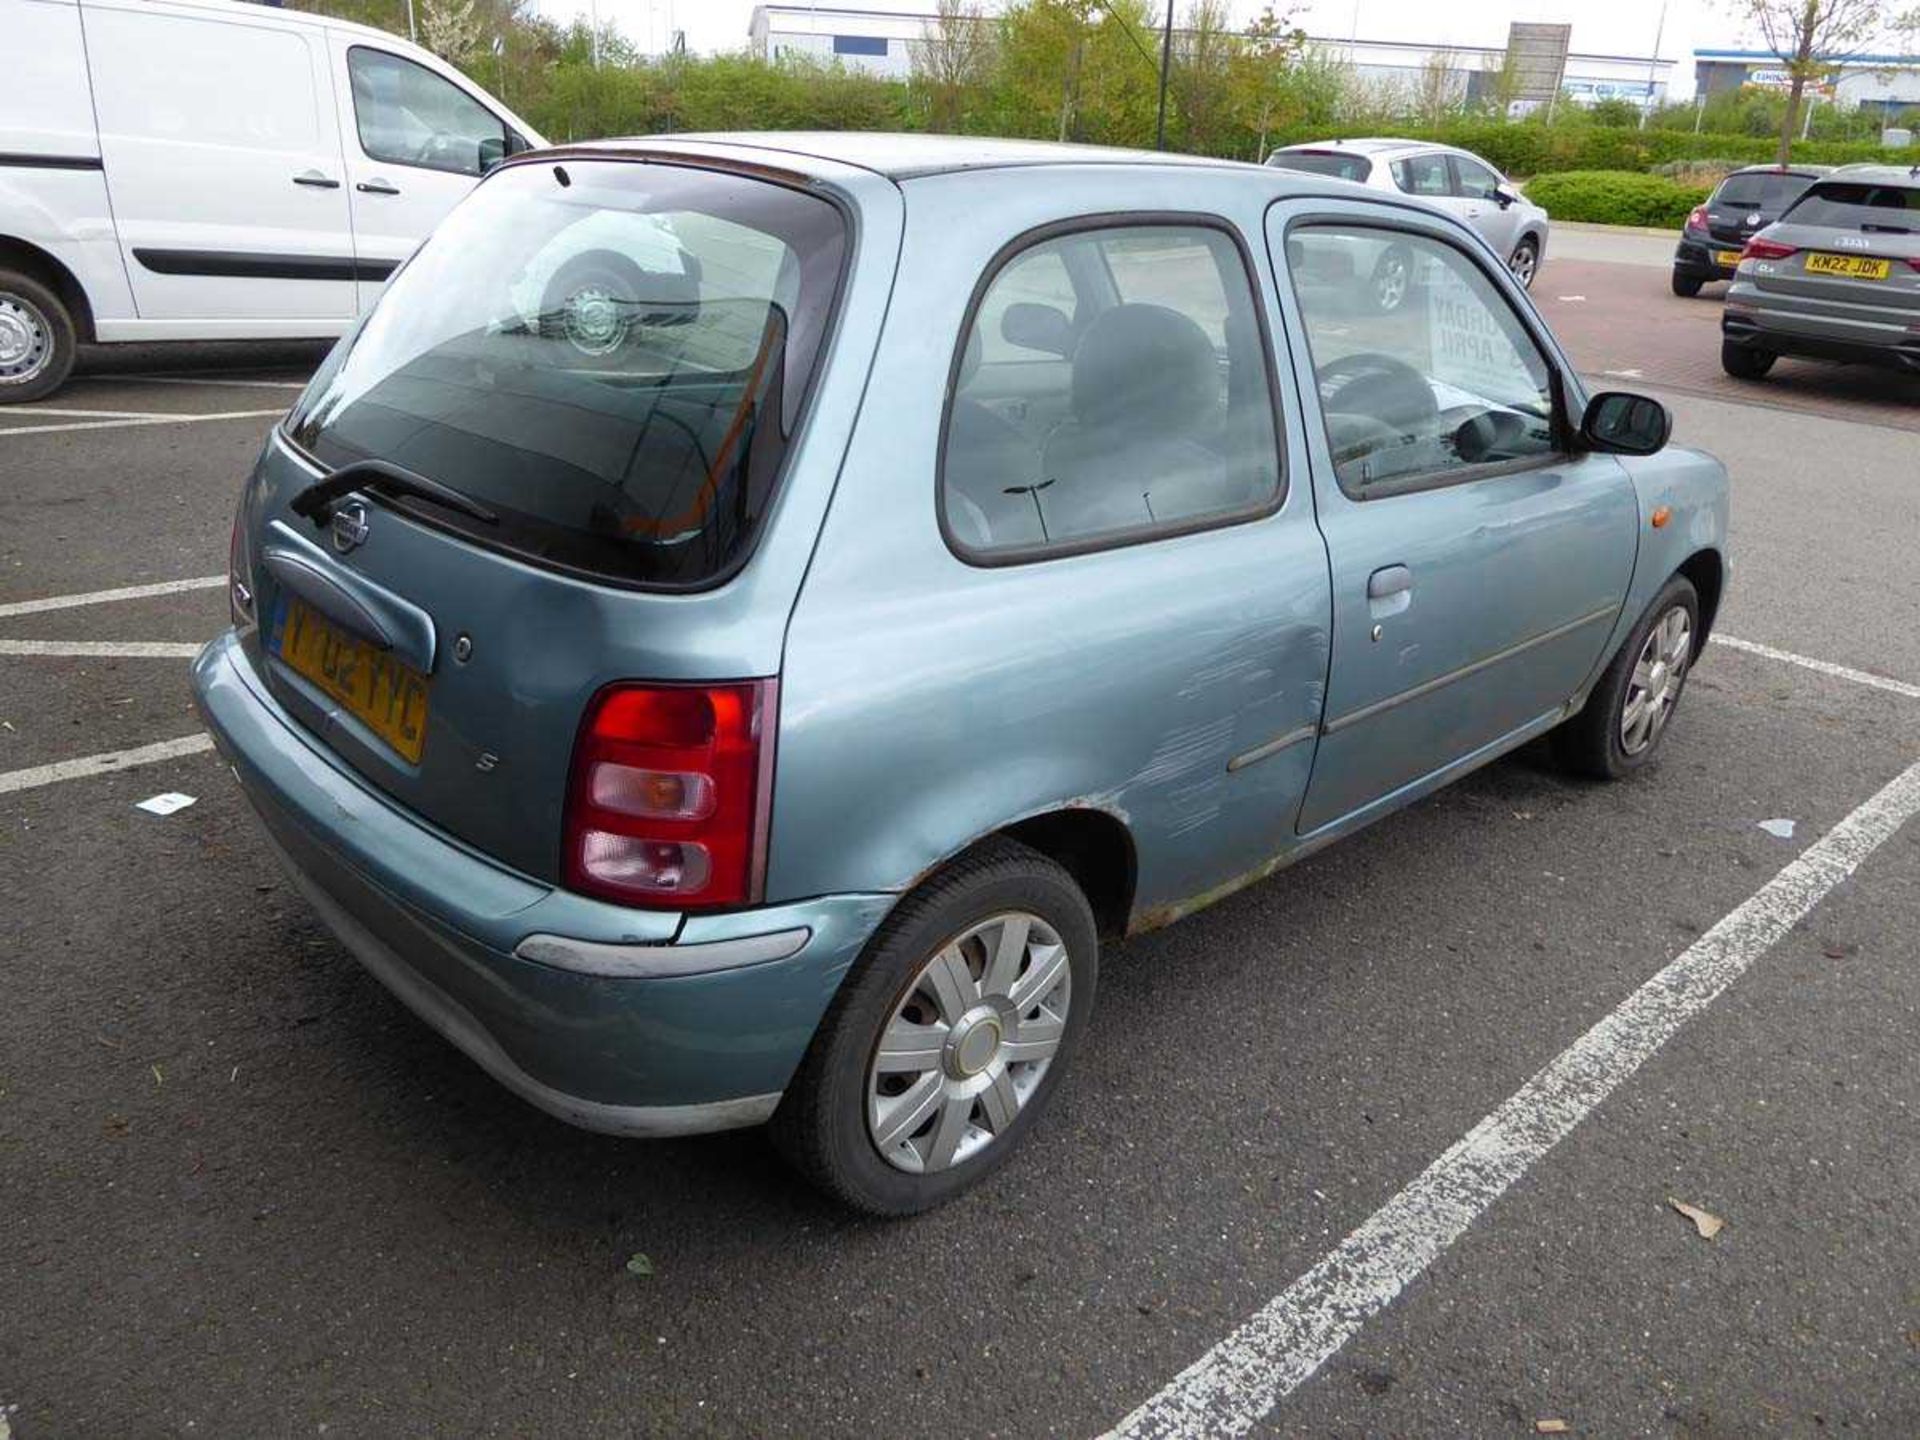 (YT02 YYC) Nissan Micra S Auto, 3-door hatchback in grey, first registered 27/03/2002, 998cc - Image 4 of 10